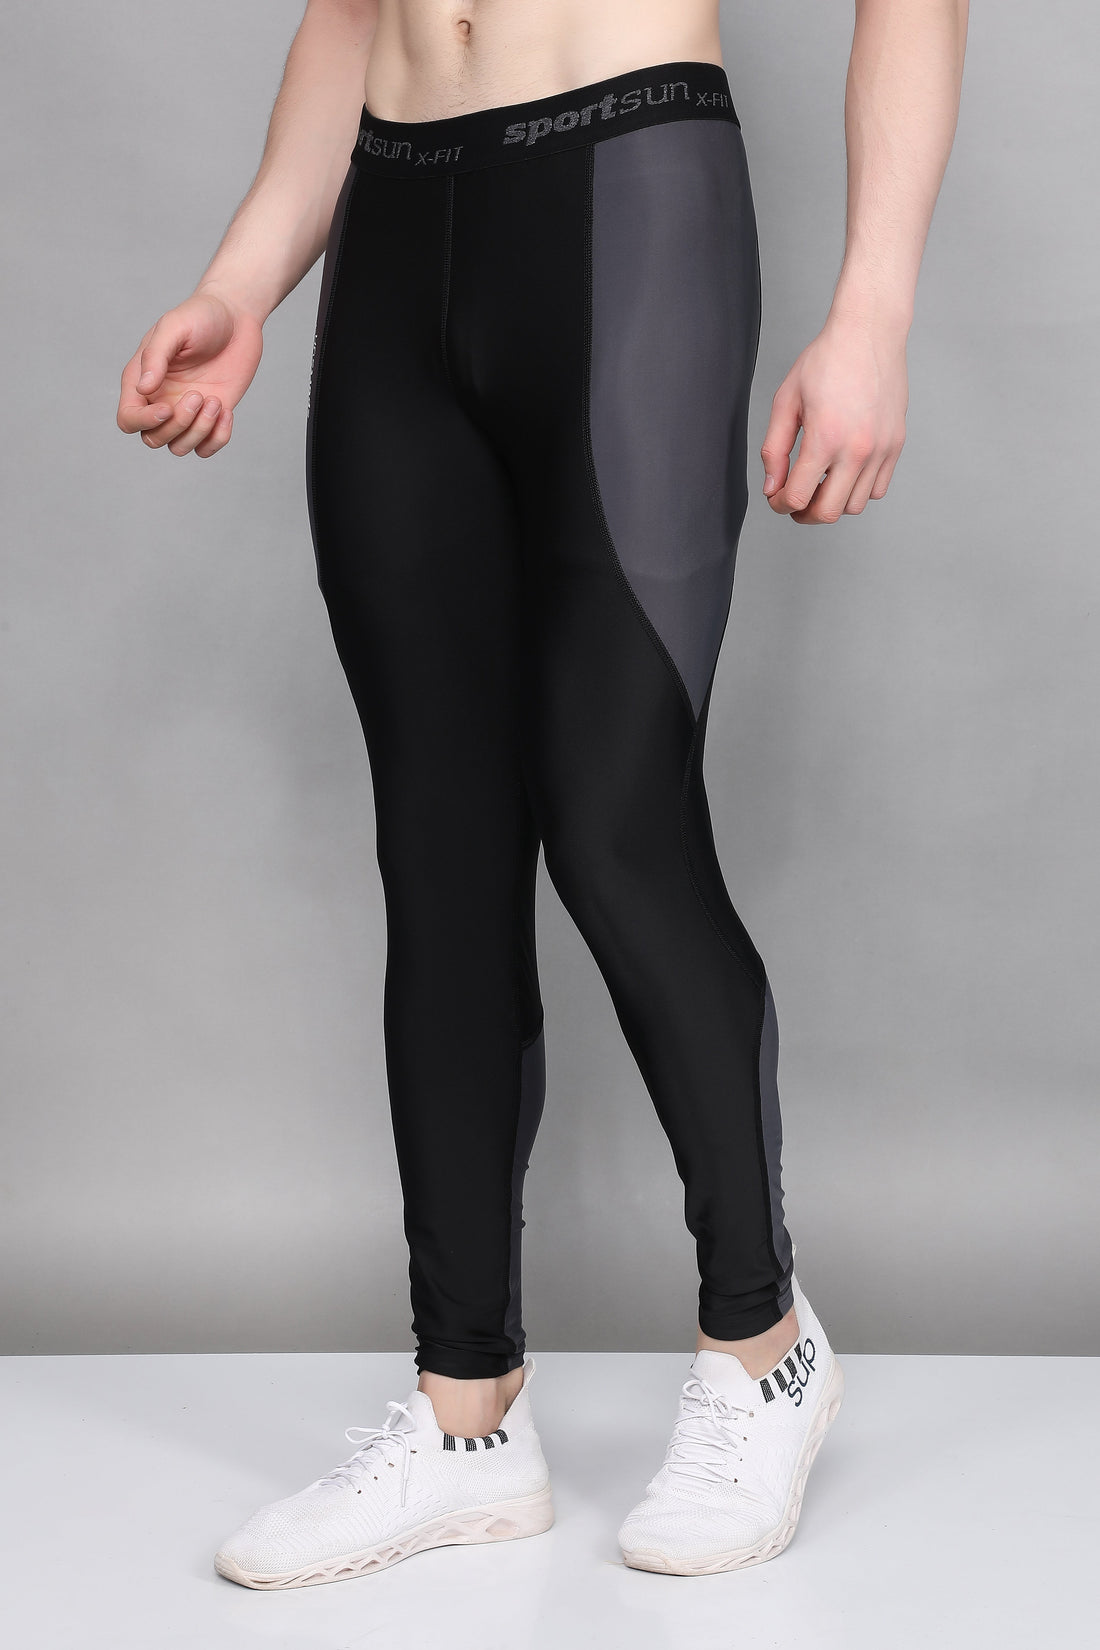 Liveday Men Compression Tights Pants Gym Sport Joggers India | Ubuy